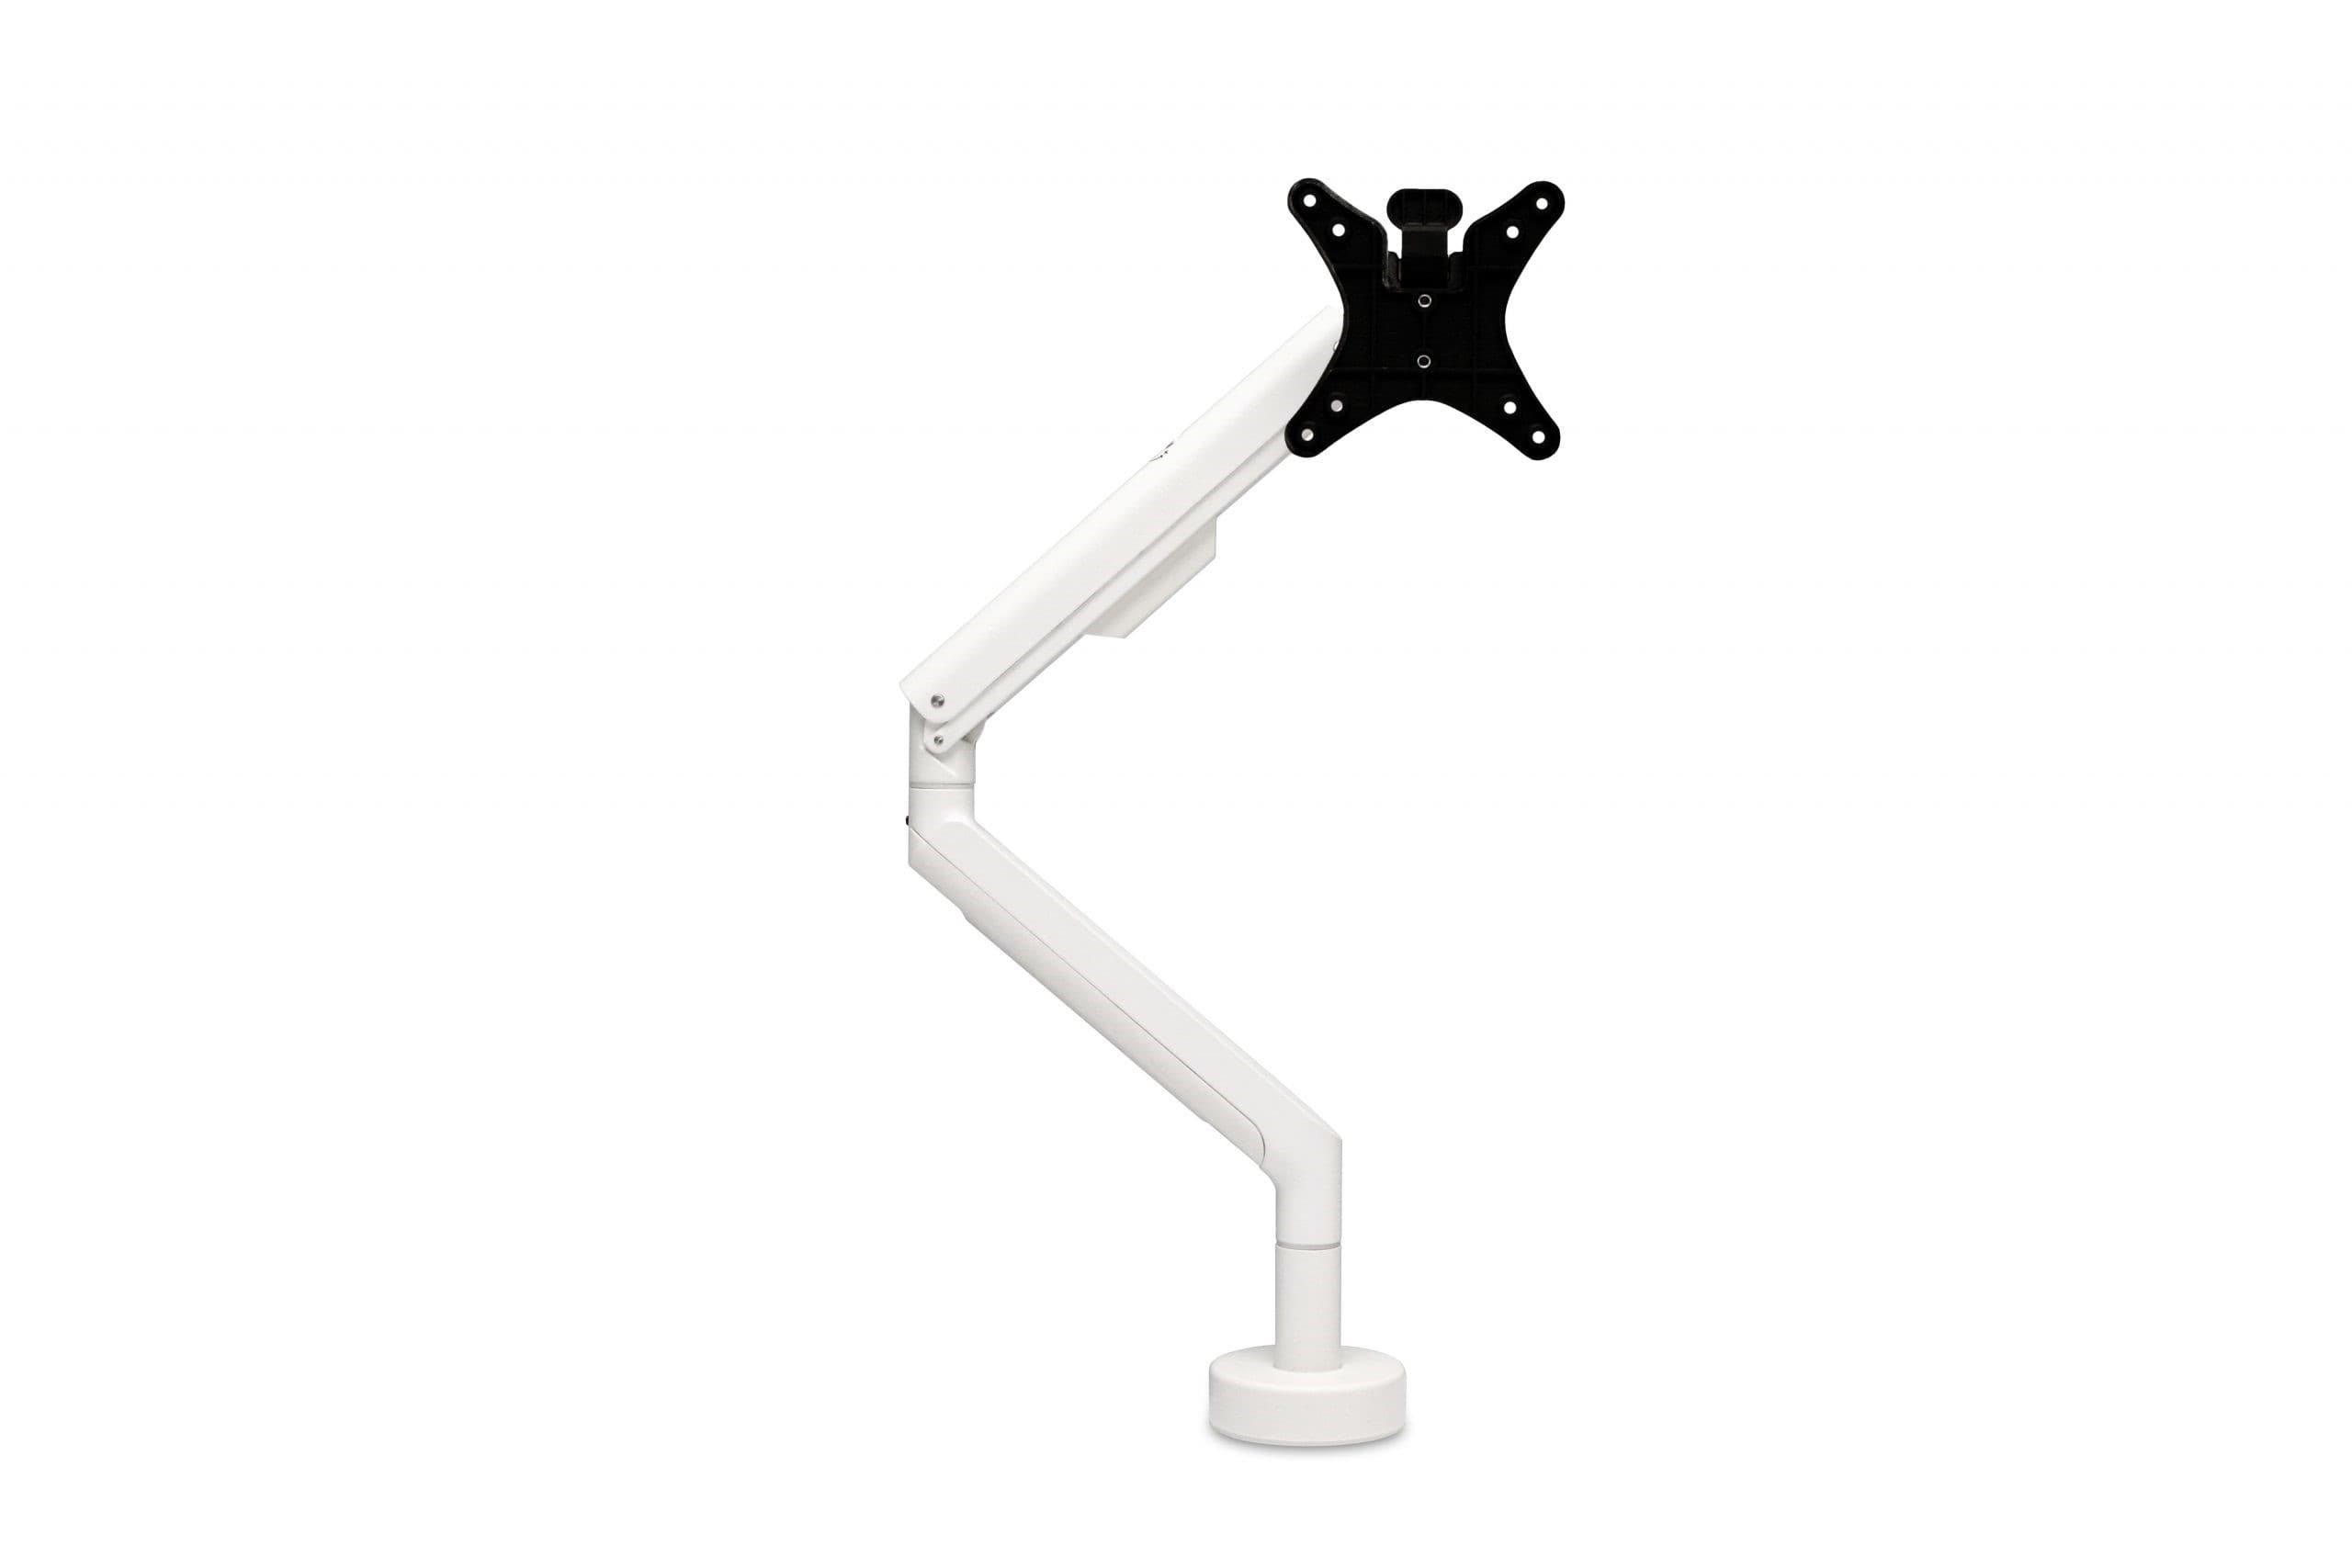 Reach spring-assisted monitor arm